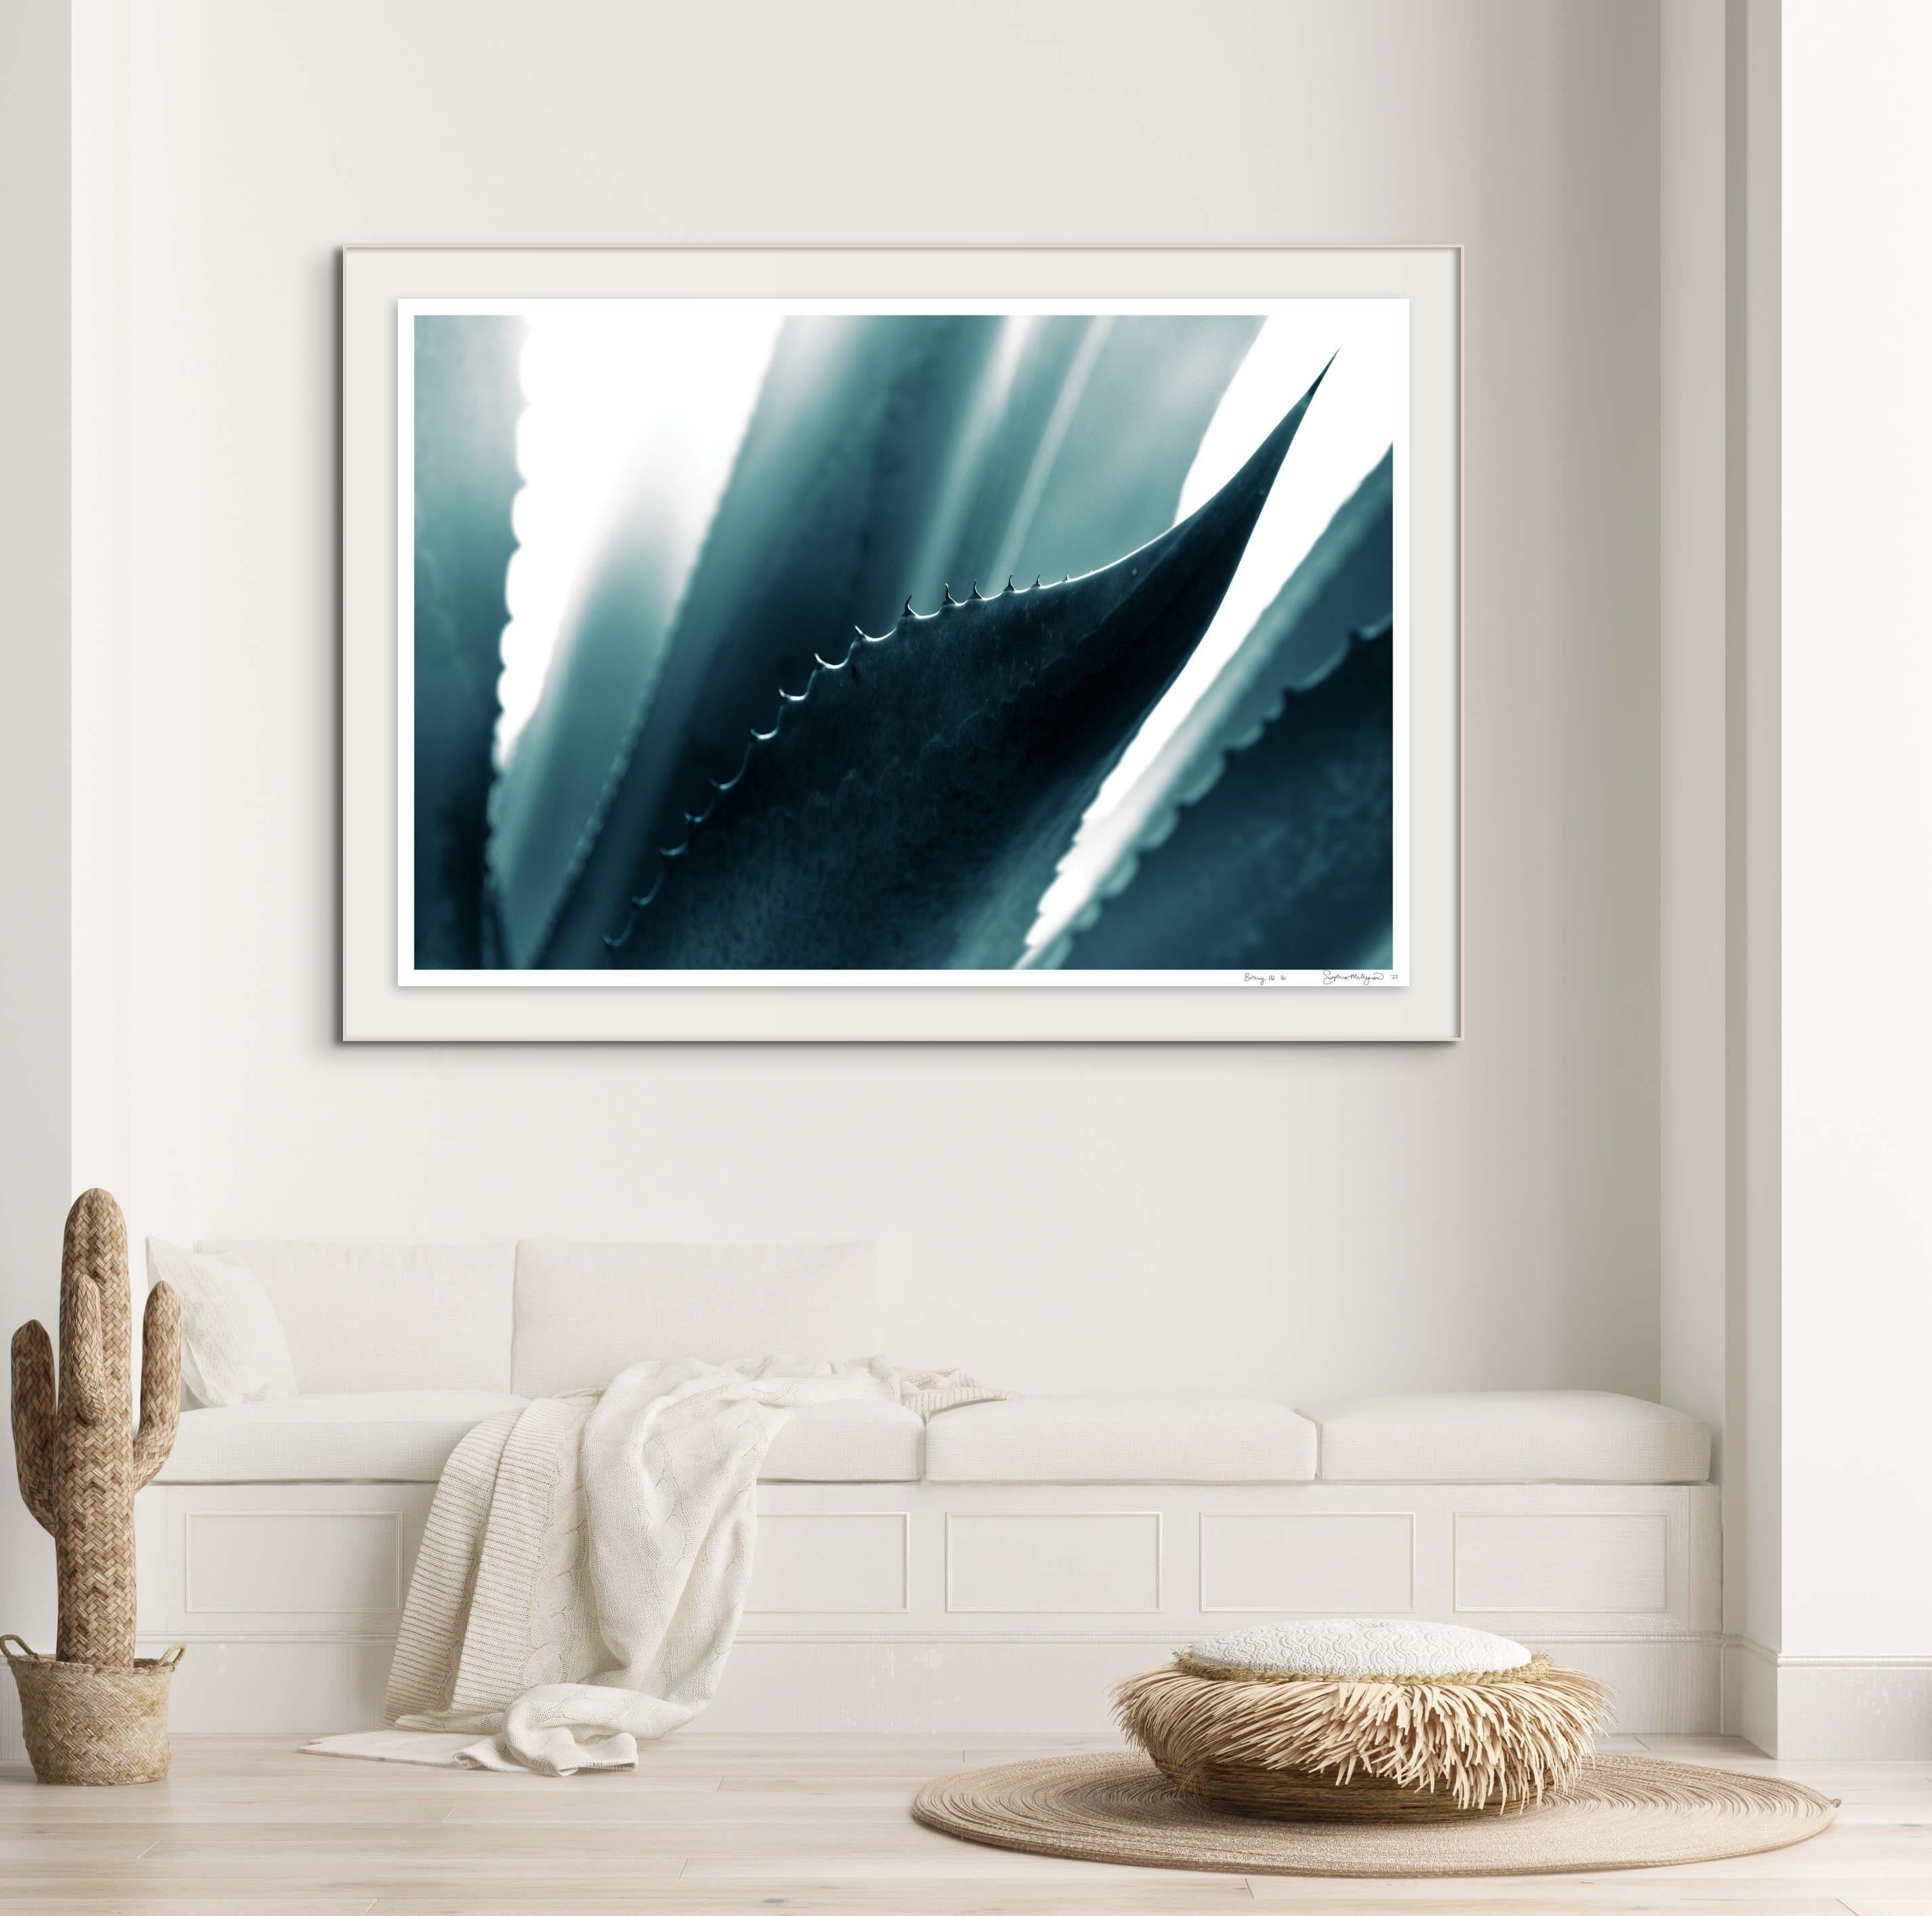 'Cicatrices 4' Large scale photo. Agave leaf, desert cactus blue teal green  - Photograph by Sophia Milligan